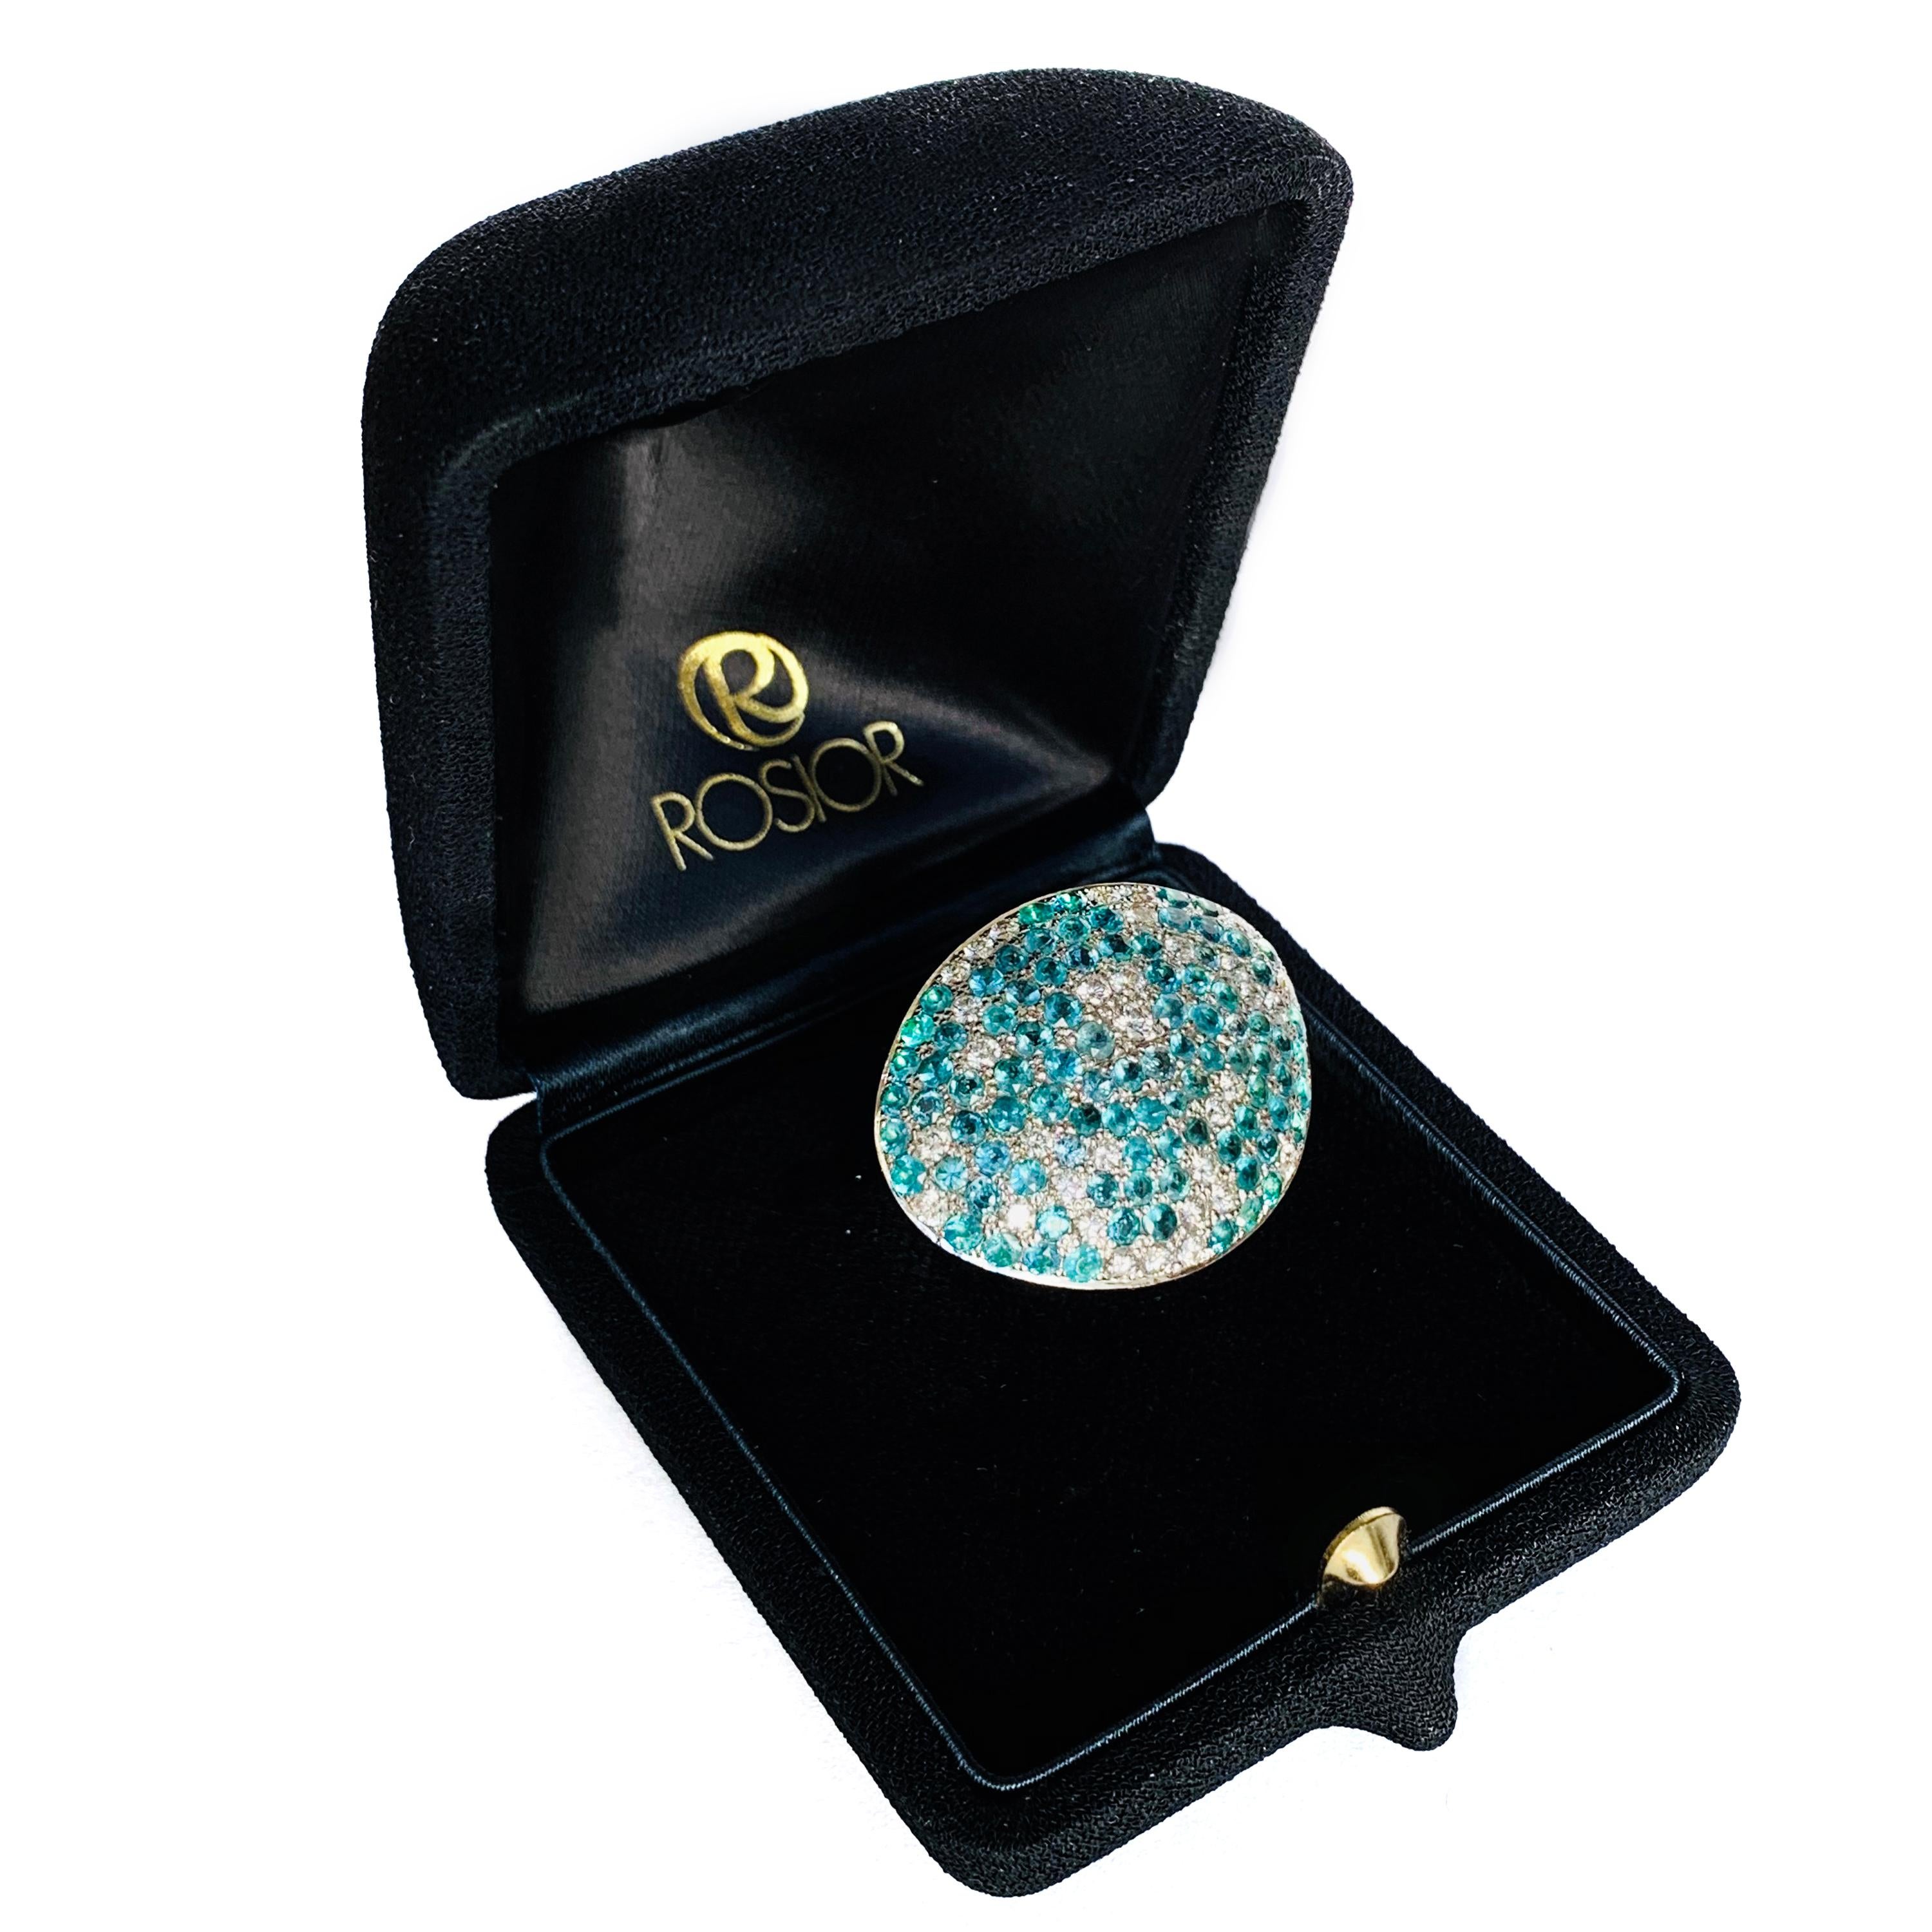 Rosior one-off Paraiba Tourmaline and Diamond Cocktail Ring set in White Gold 1